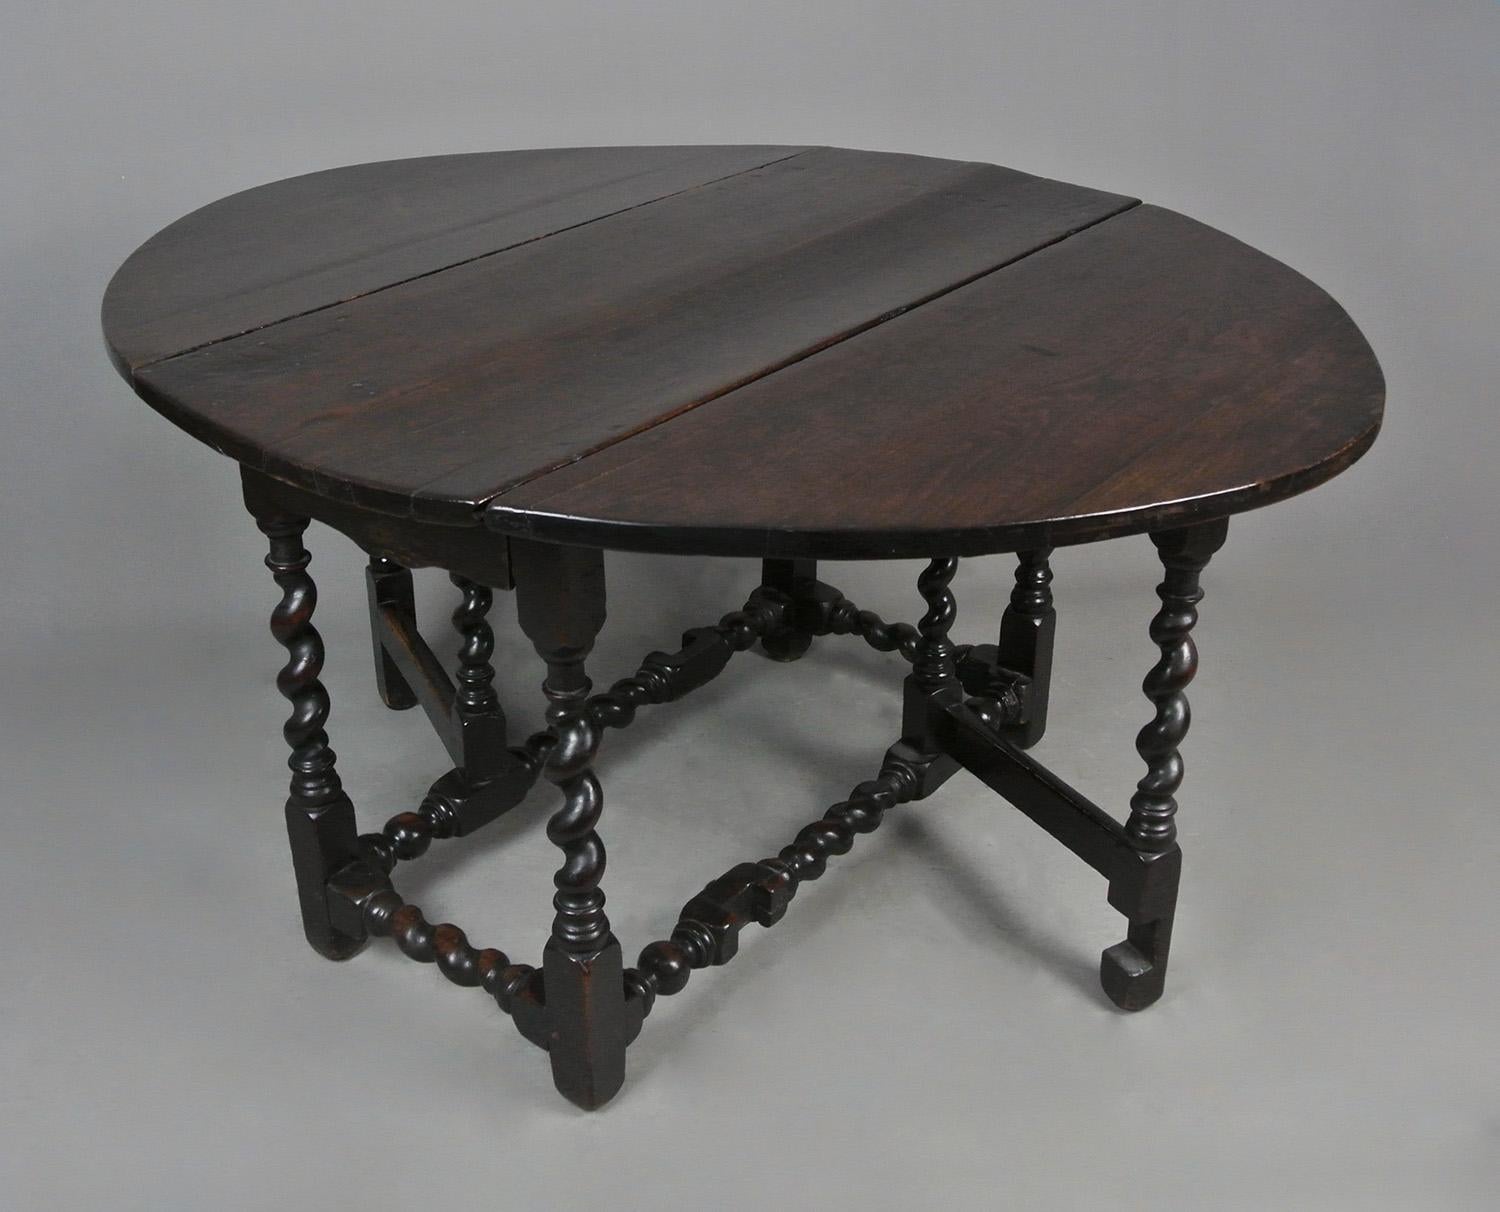 18th Century and Earlier Queen Anne Boarded Oak Drop Leaf Dining Table c. 1700